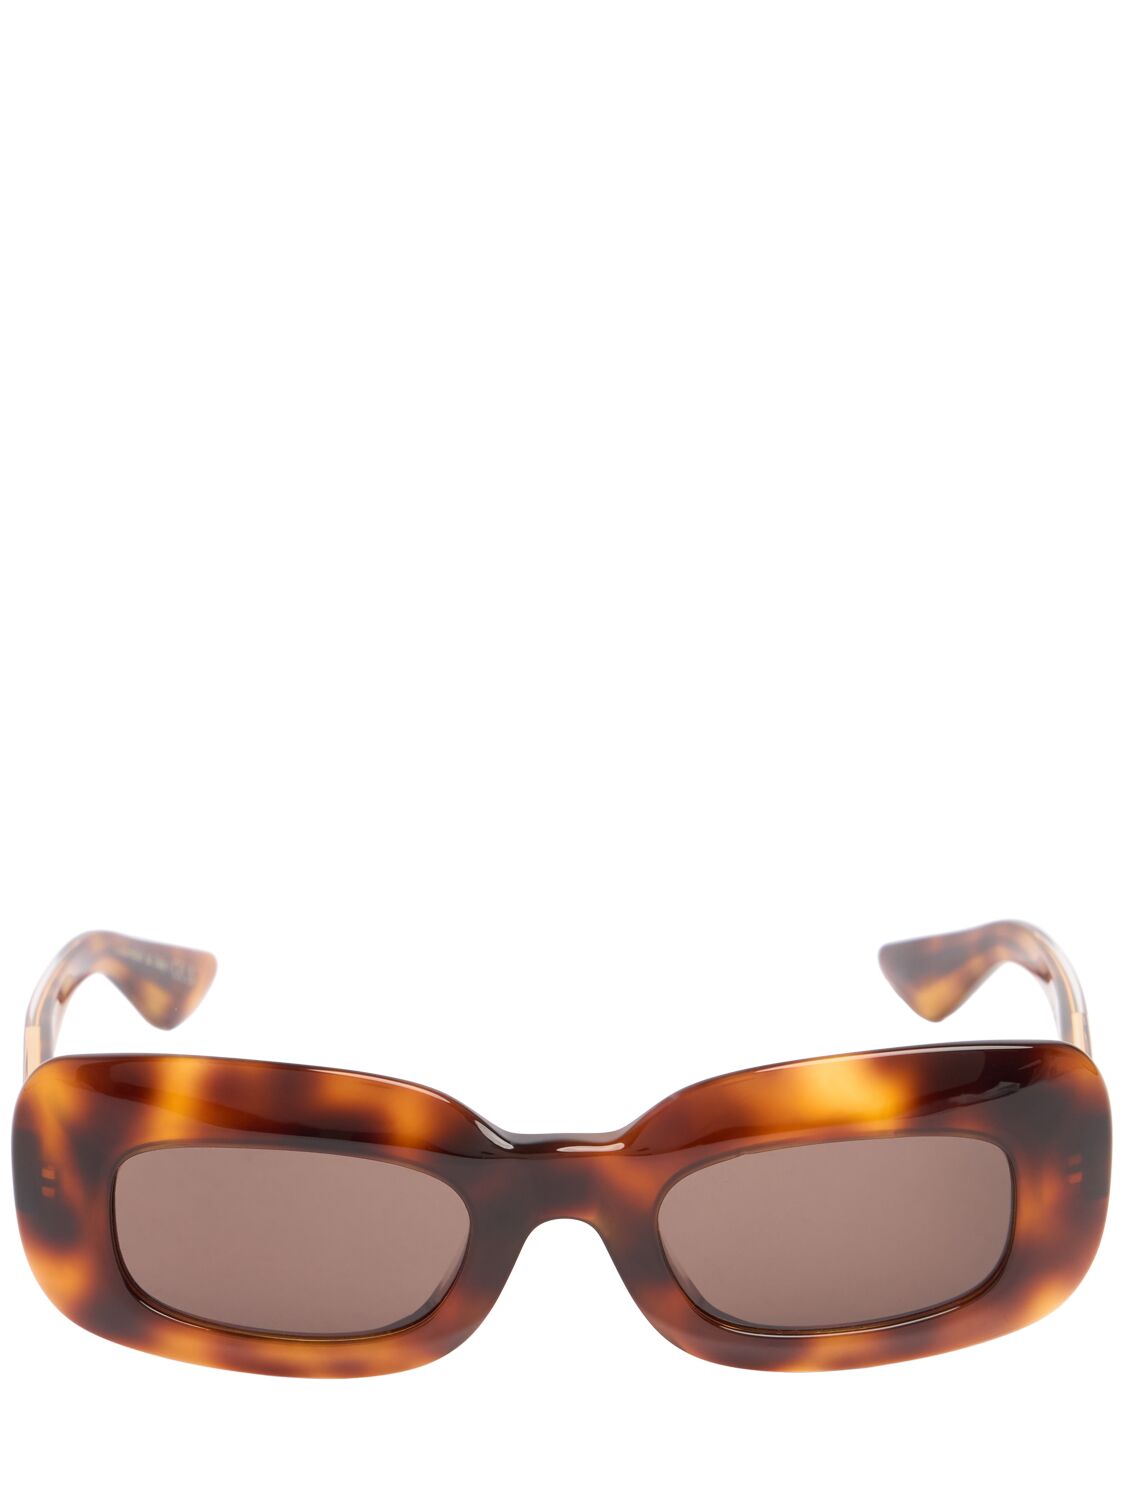 Khaite X Oliver People Square Sunglasses In Brown